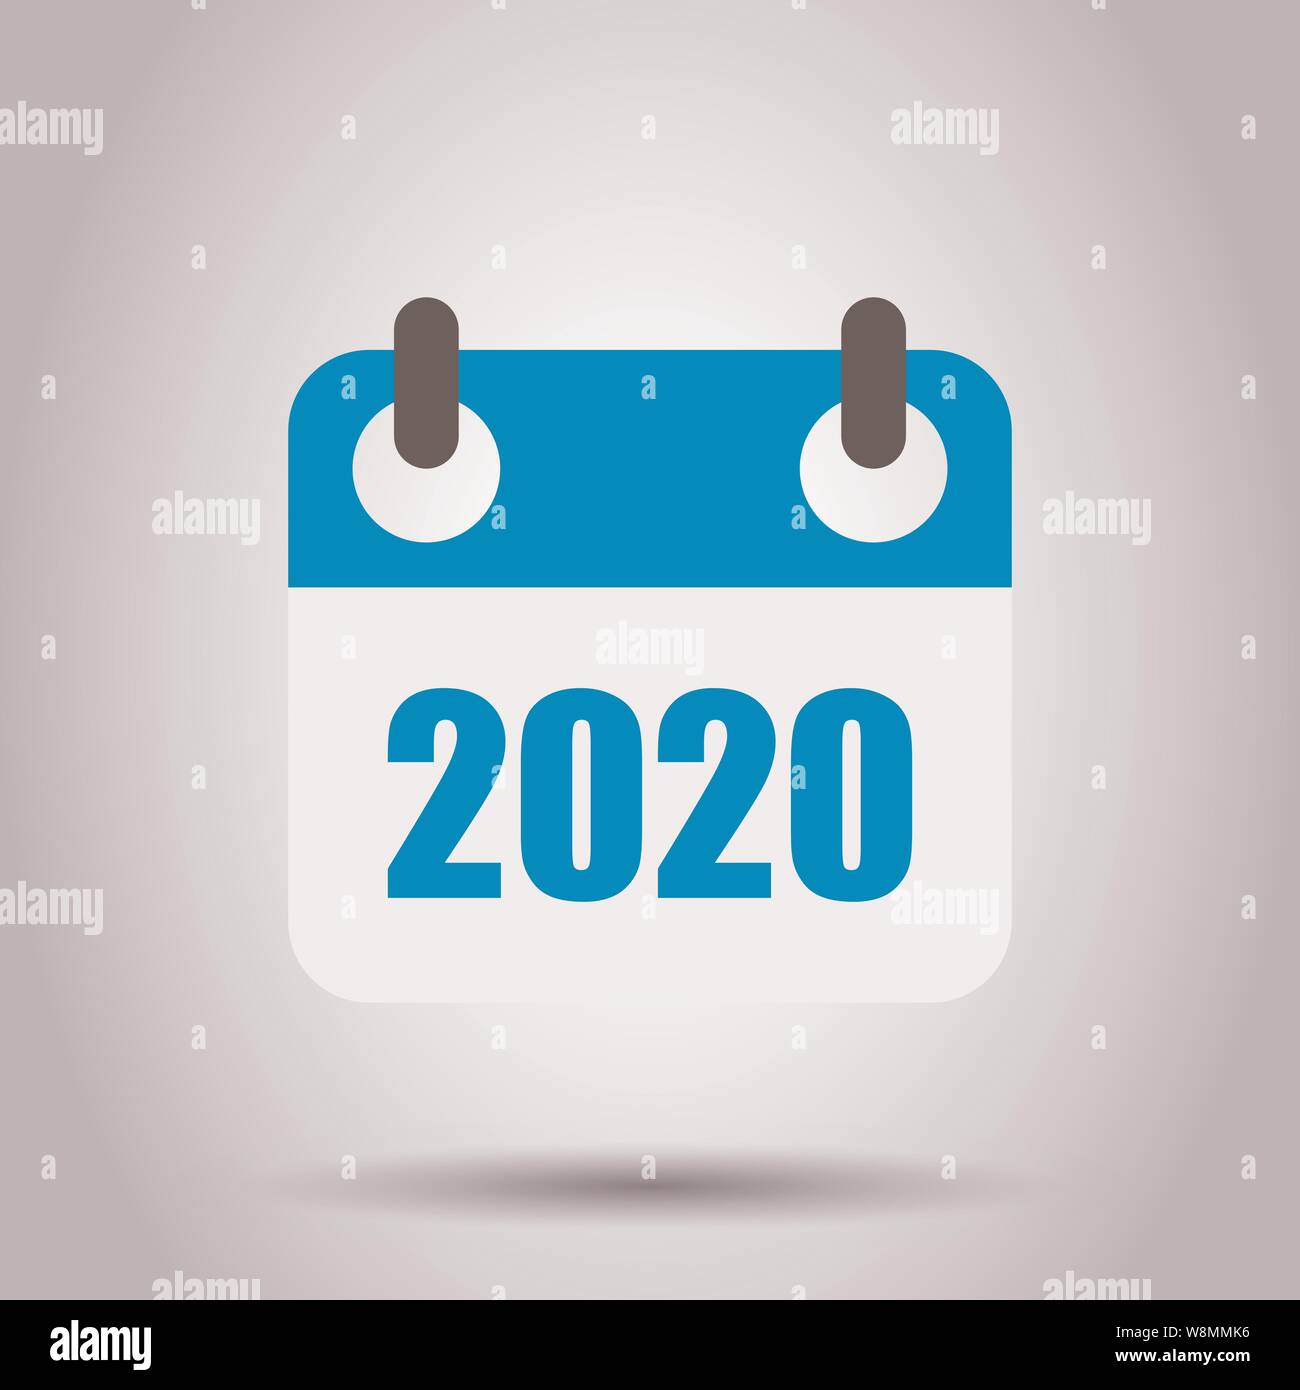 Calendar 2020 organizer icon in transparent style. Appointment event vector illustration on isolated background. Month deadline business concept. Stock Vector